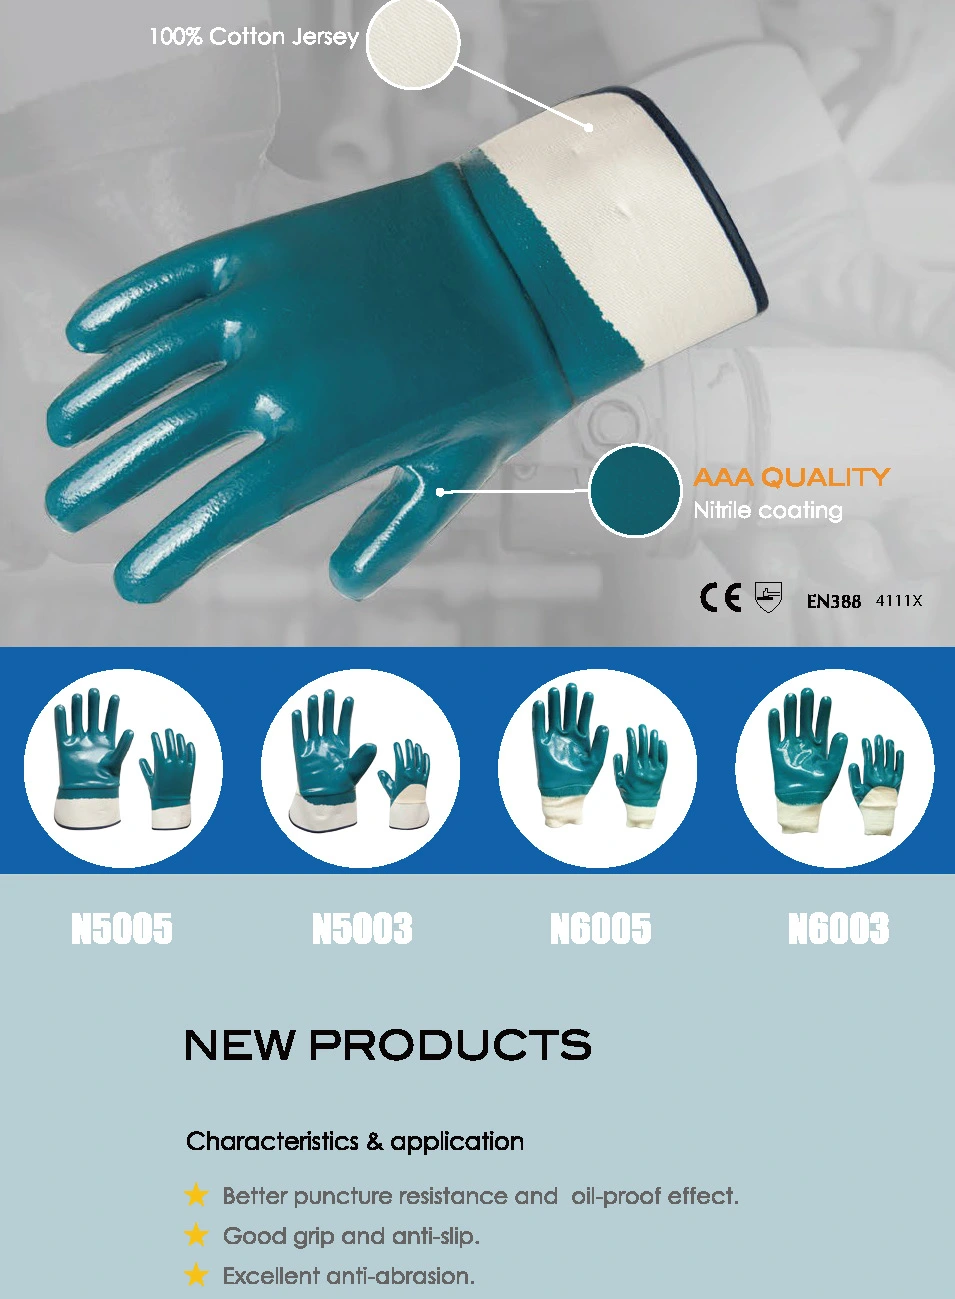 Industrial Nitrile Safety Gloves Cotton Liner Nitrile Fully Coated Smooth Finish Safety Cuff Work Gloves